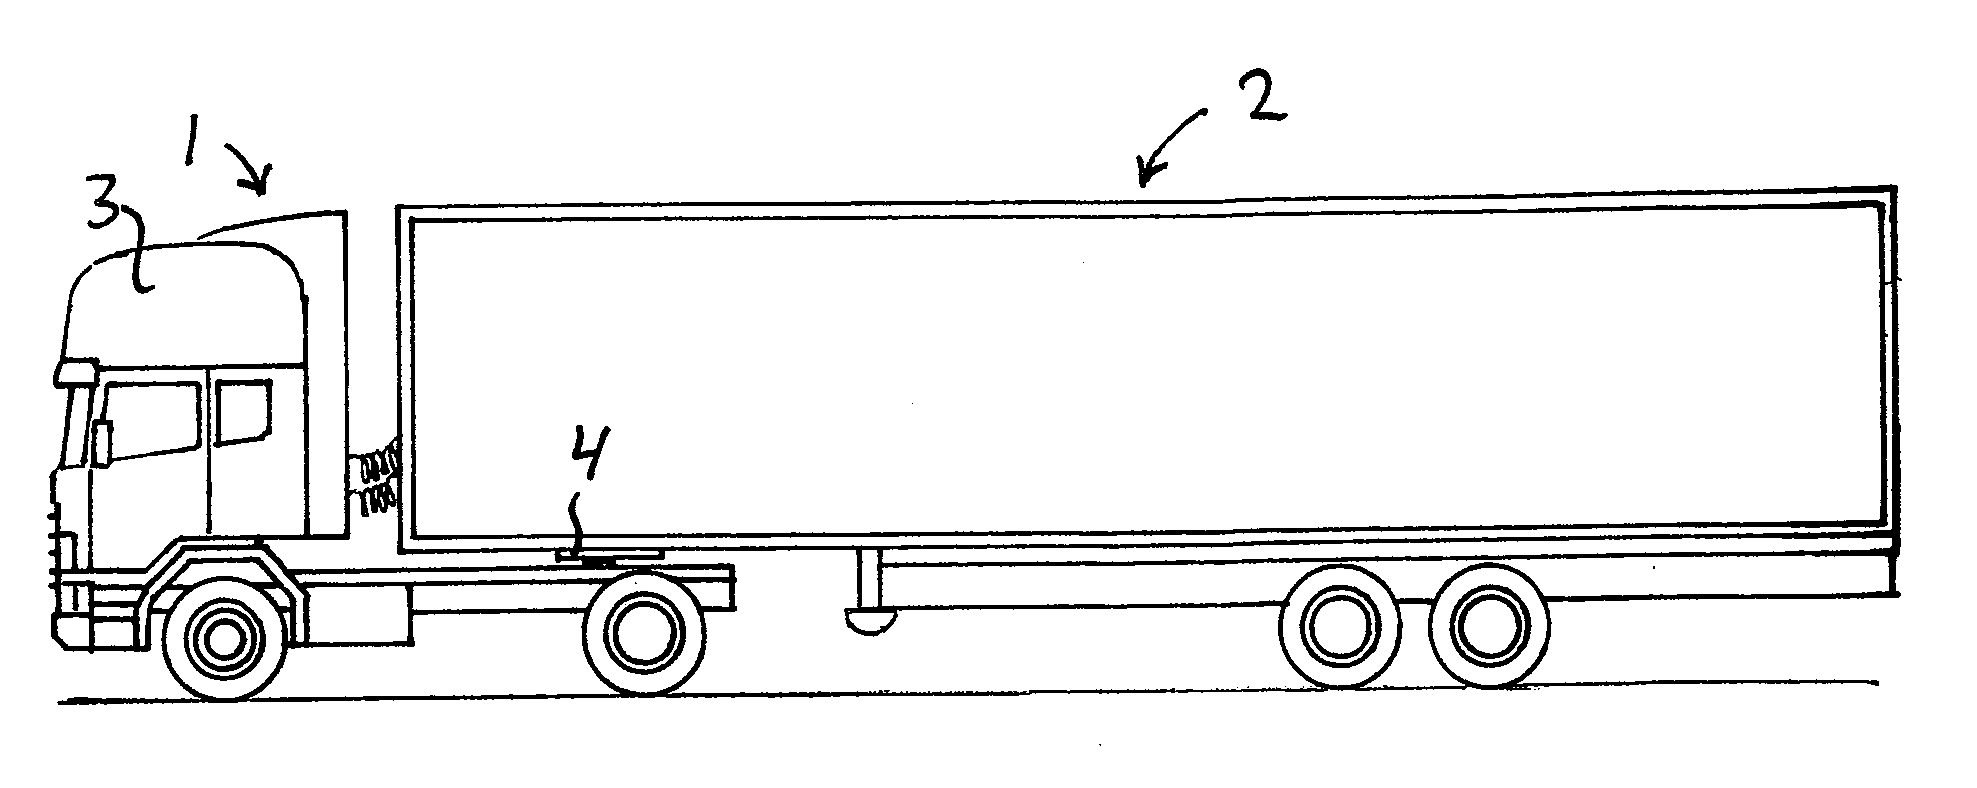 Method and system for regulating the linear position of a fifth wheel